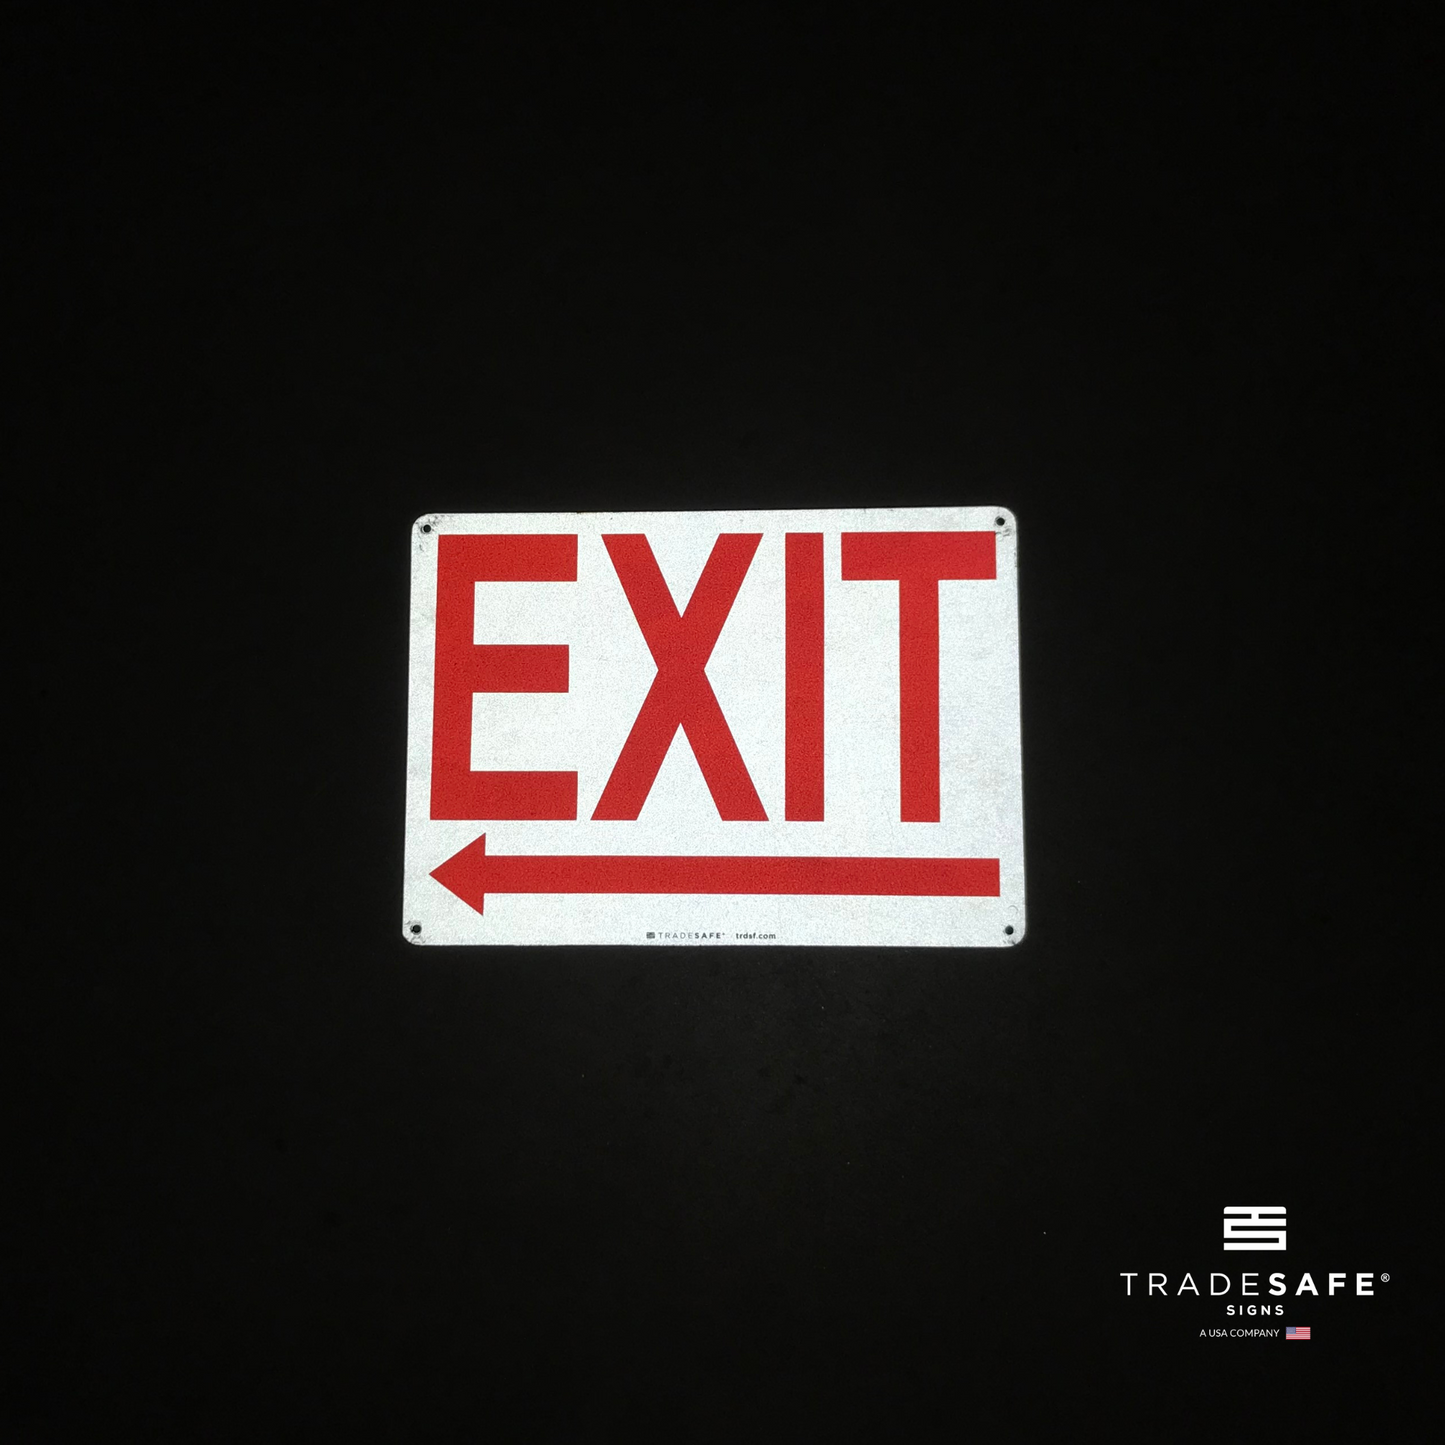 reflective attribute of exit sign with left arrow on black background